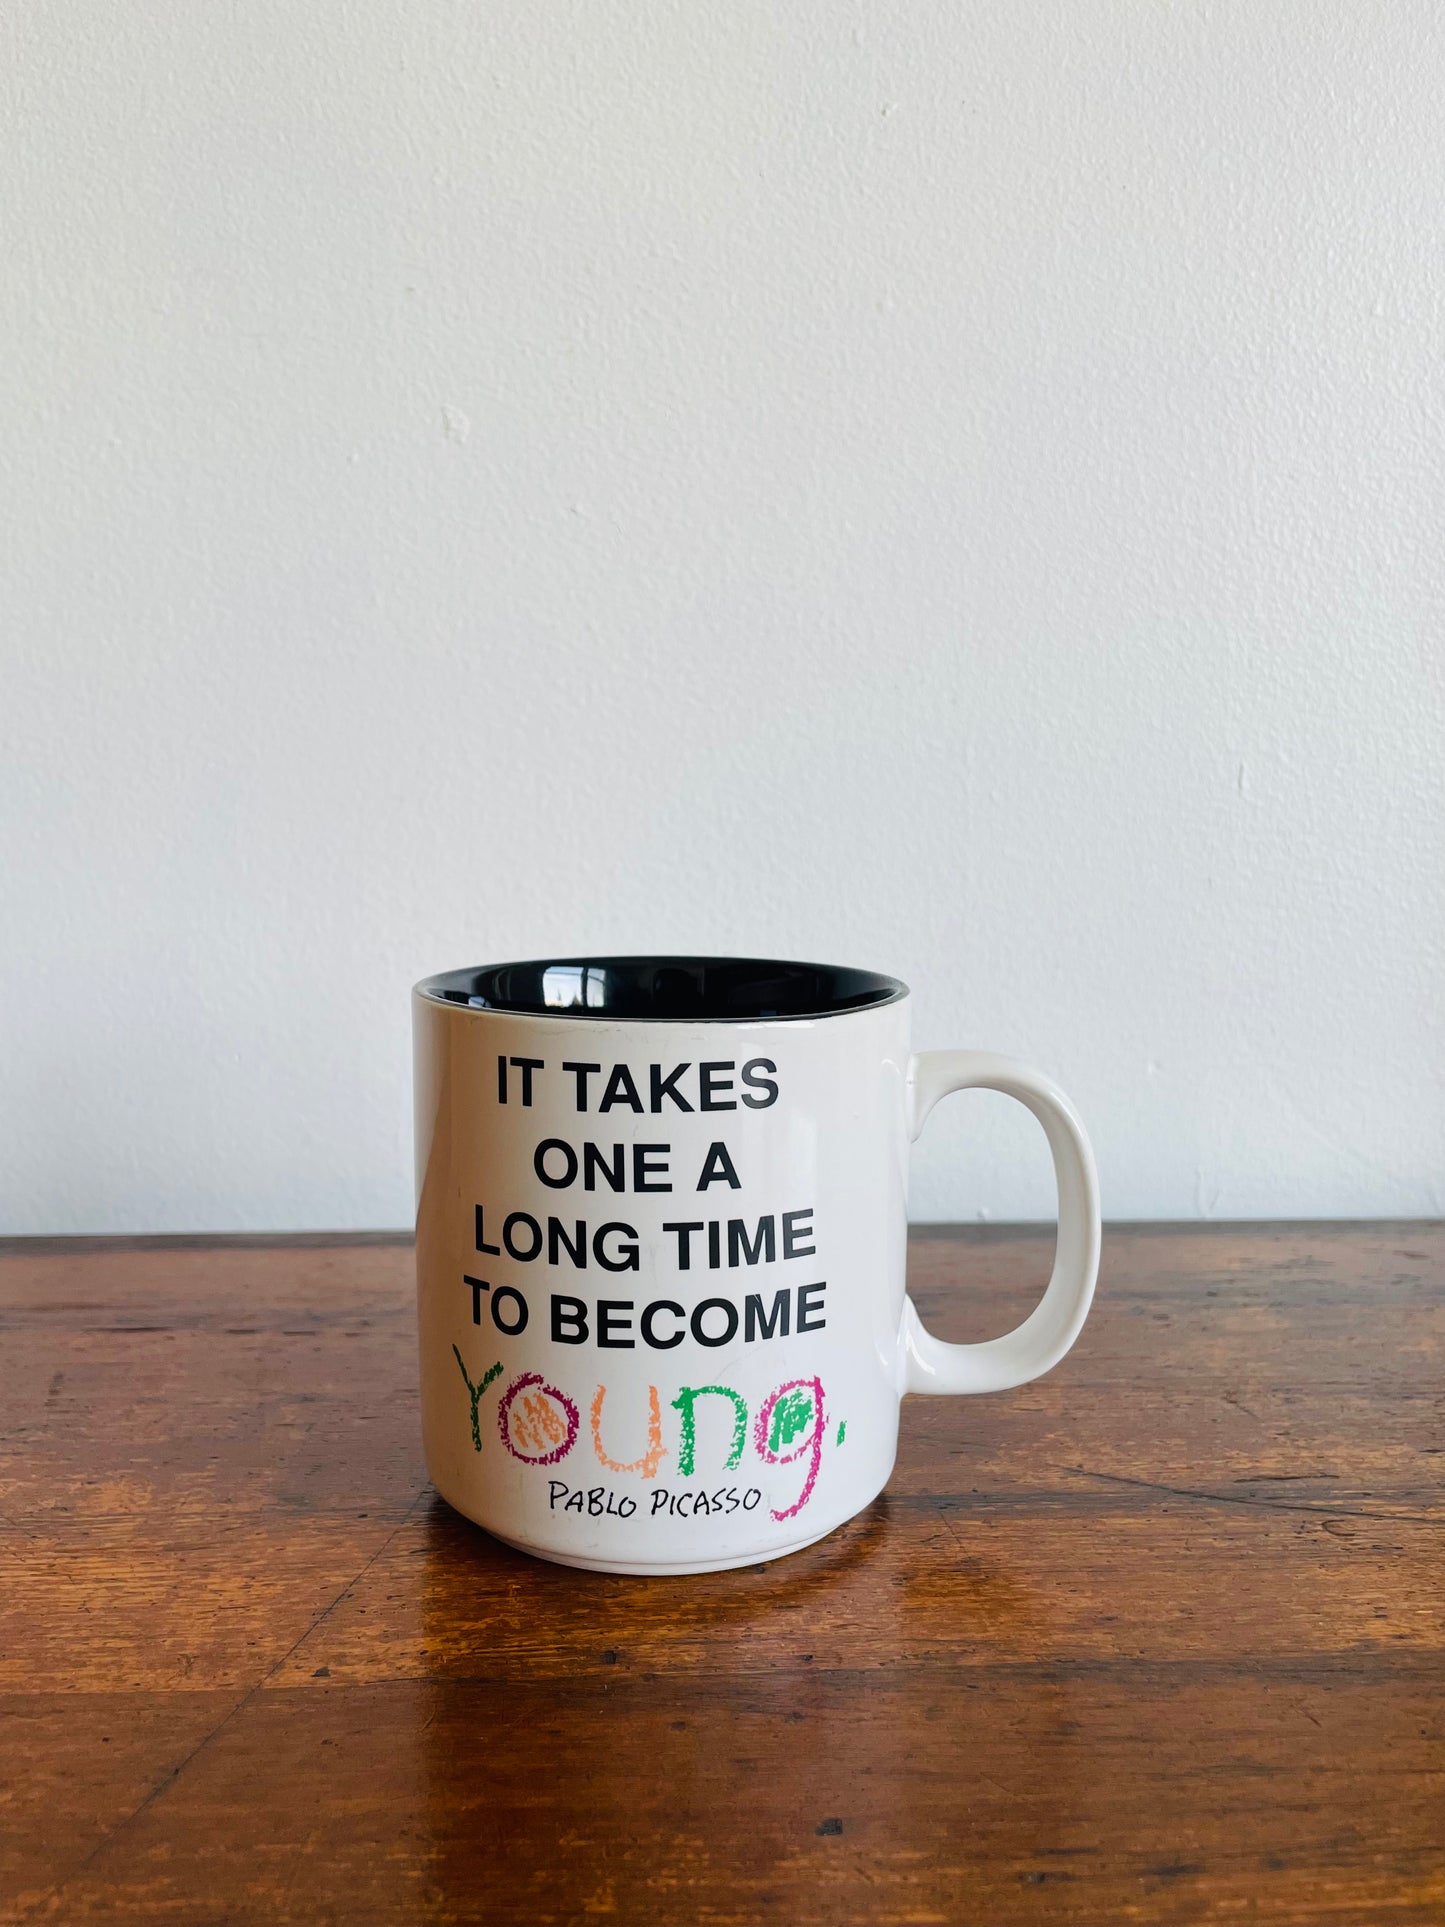 Pablo Picasso Mug - It Takes One a Long Time to Become Young